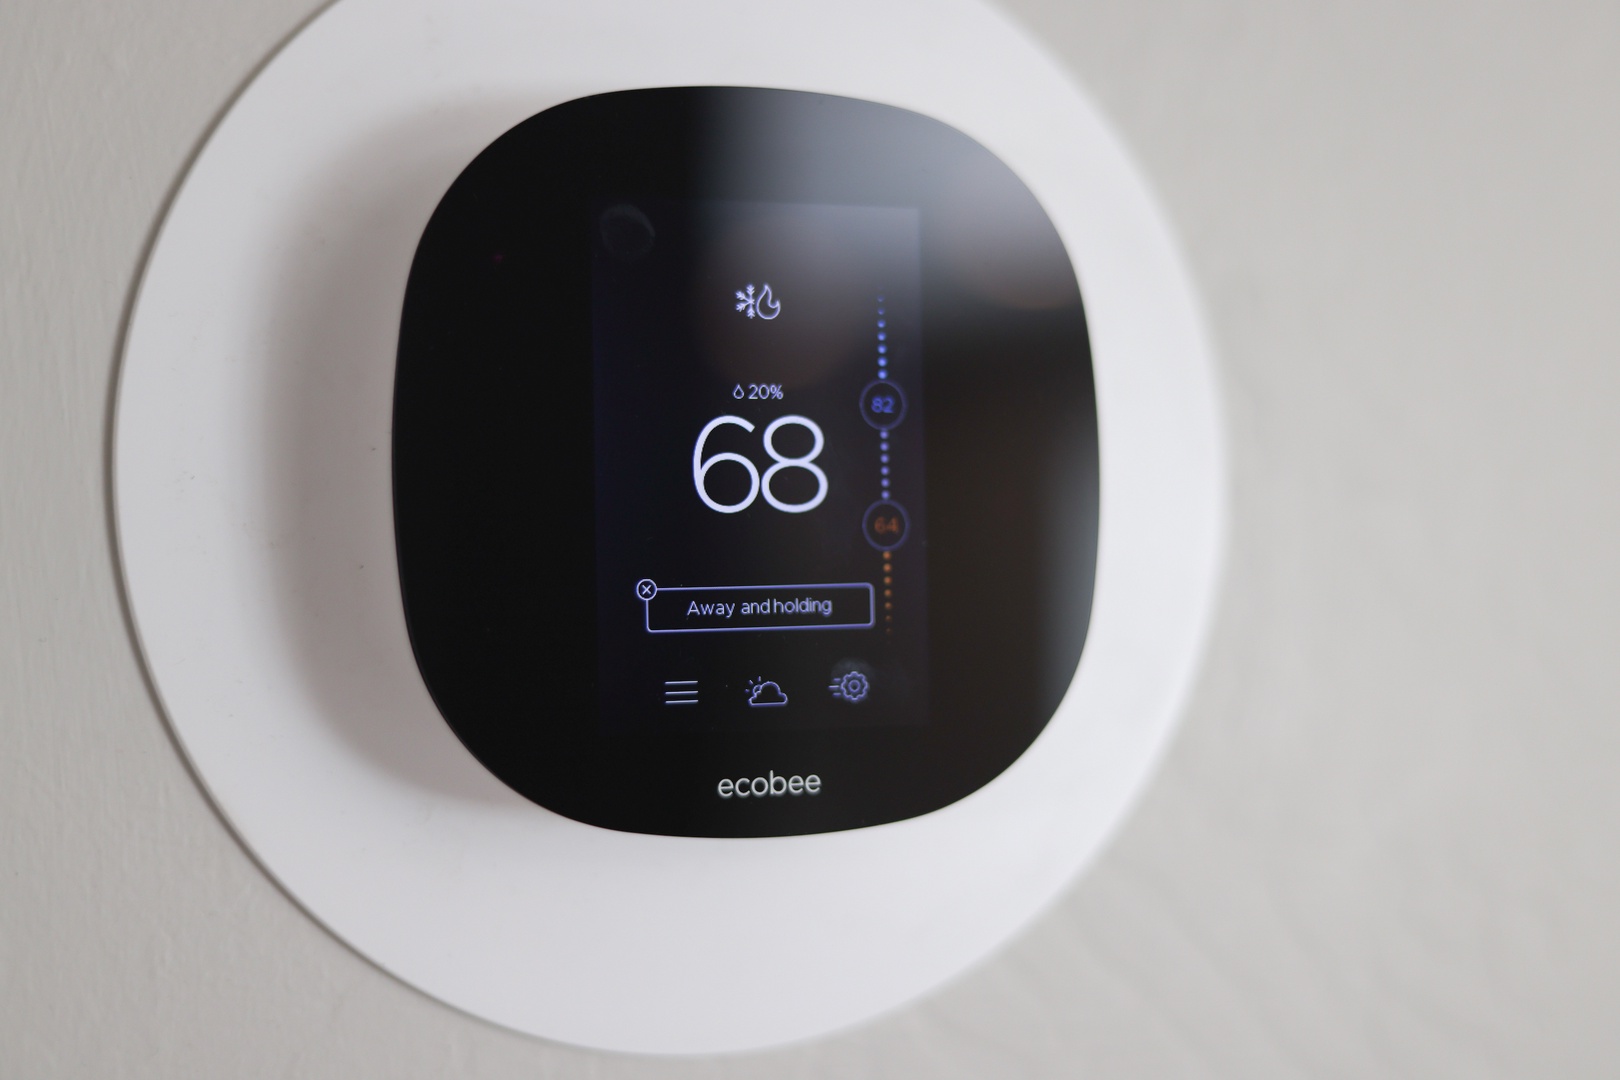 Two Ecobee Smart Thermostats for the two A/C in the home